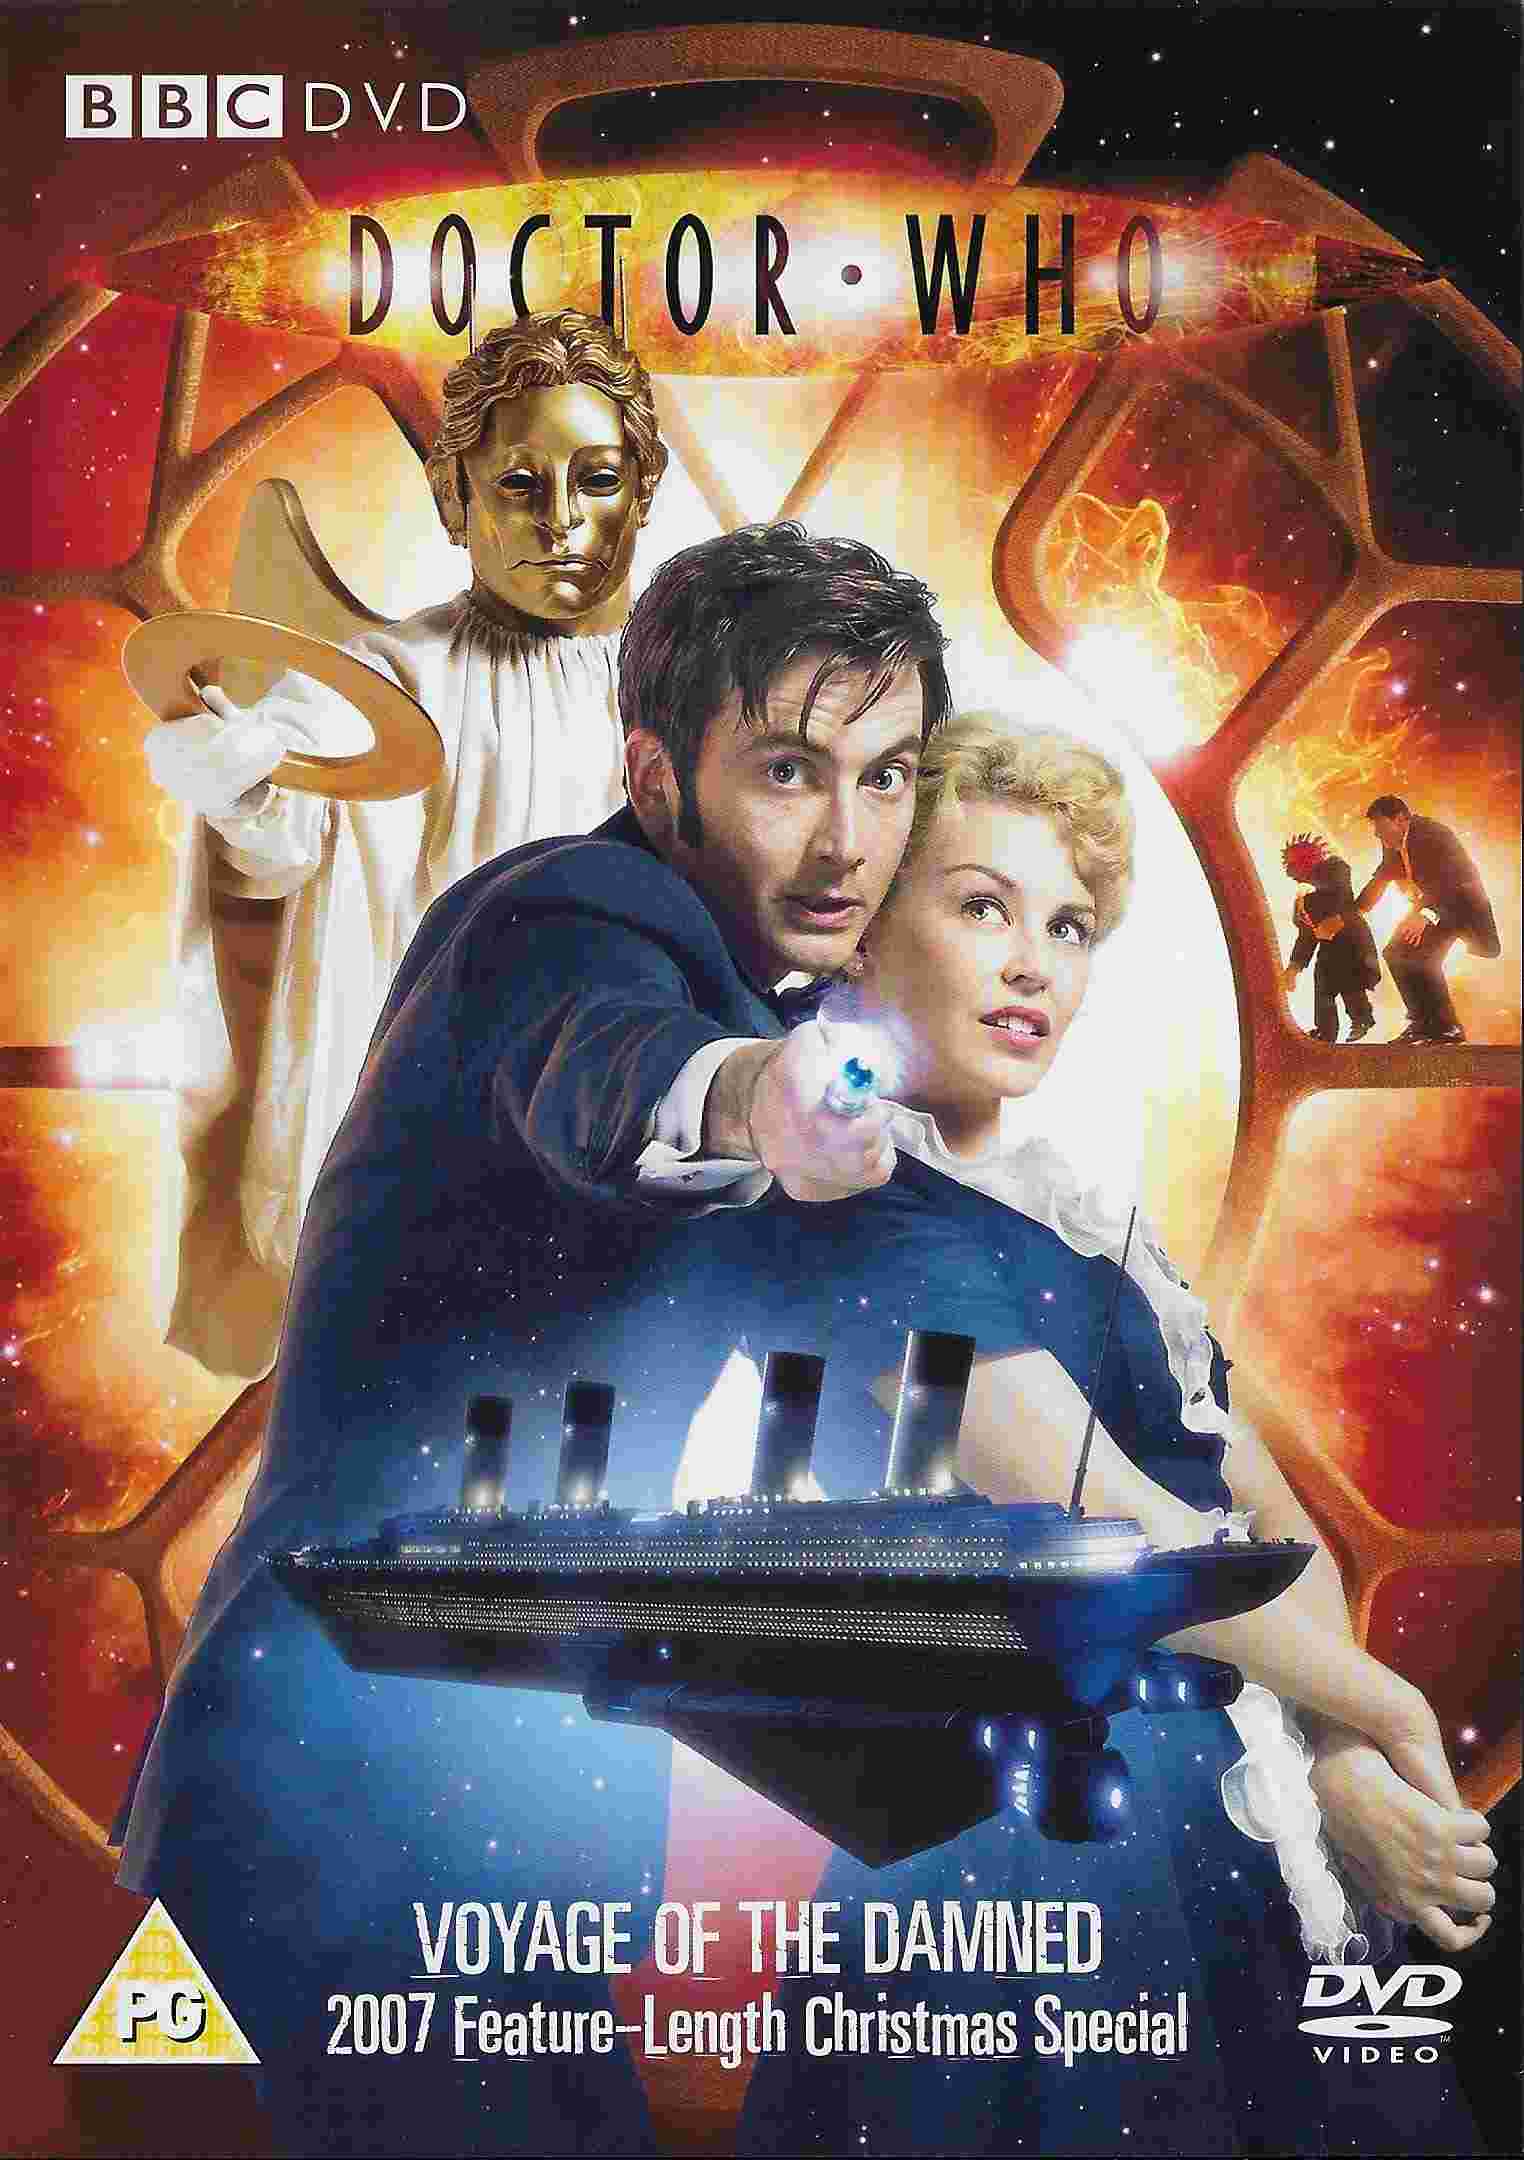 Picture of BBCDVD 2604 Doctor Who - Series 3, voyage of the damned by artist Russell T Davies from the BBC records and Tapes library